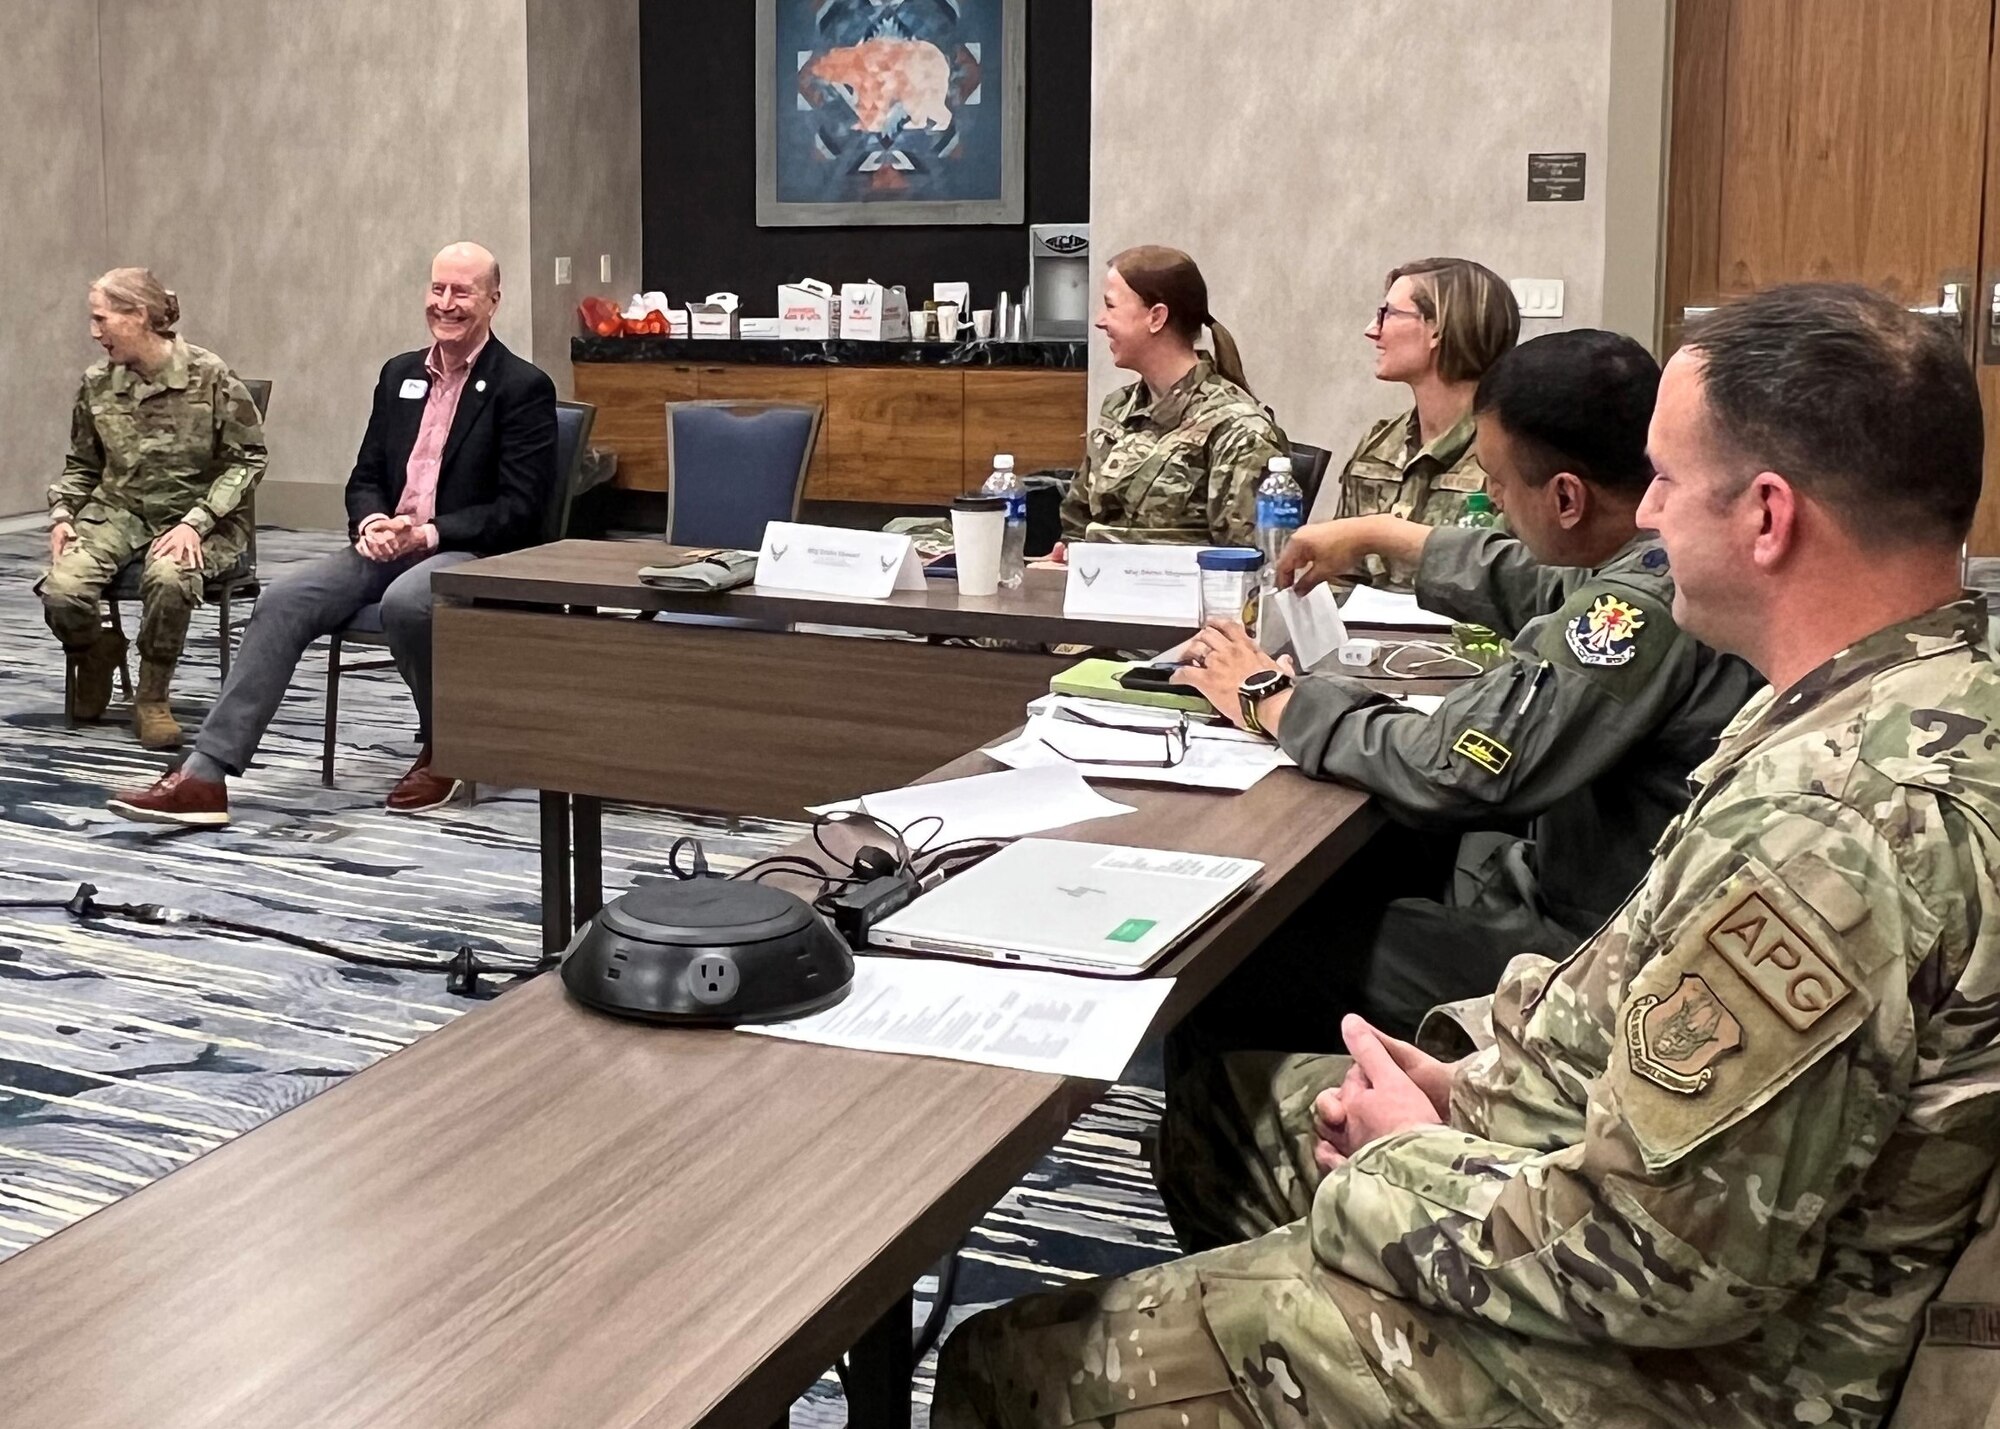 Maj Gen (Ret) Douglas Raaberg (second from left), AFA Executive Vice-President, welcomed the Reserve Council to the Air Warfighters Symposium in Denver this past March.